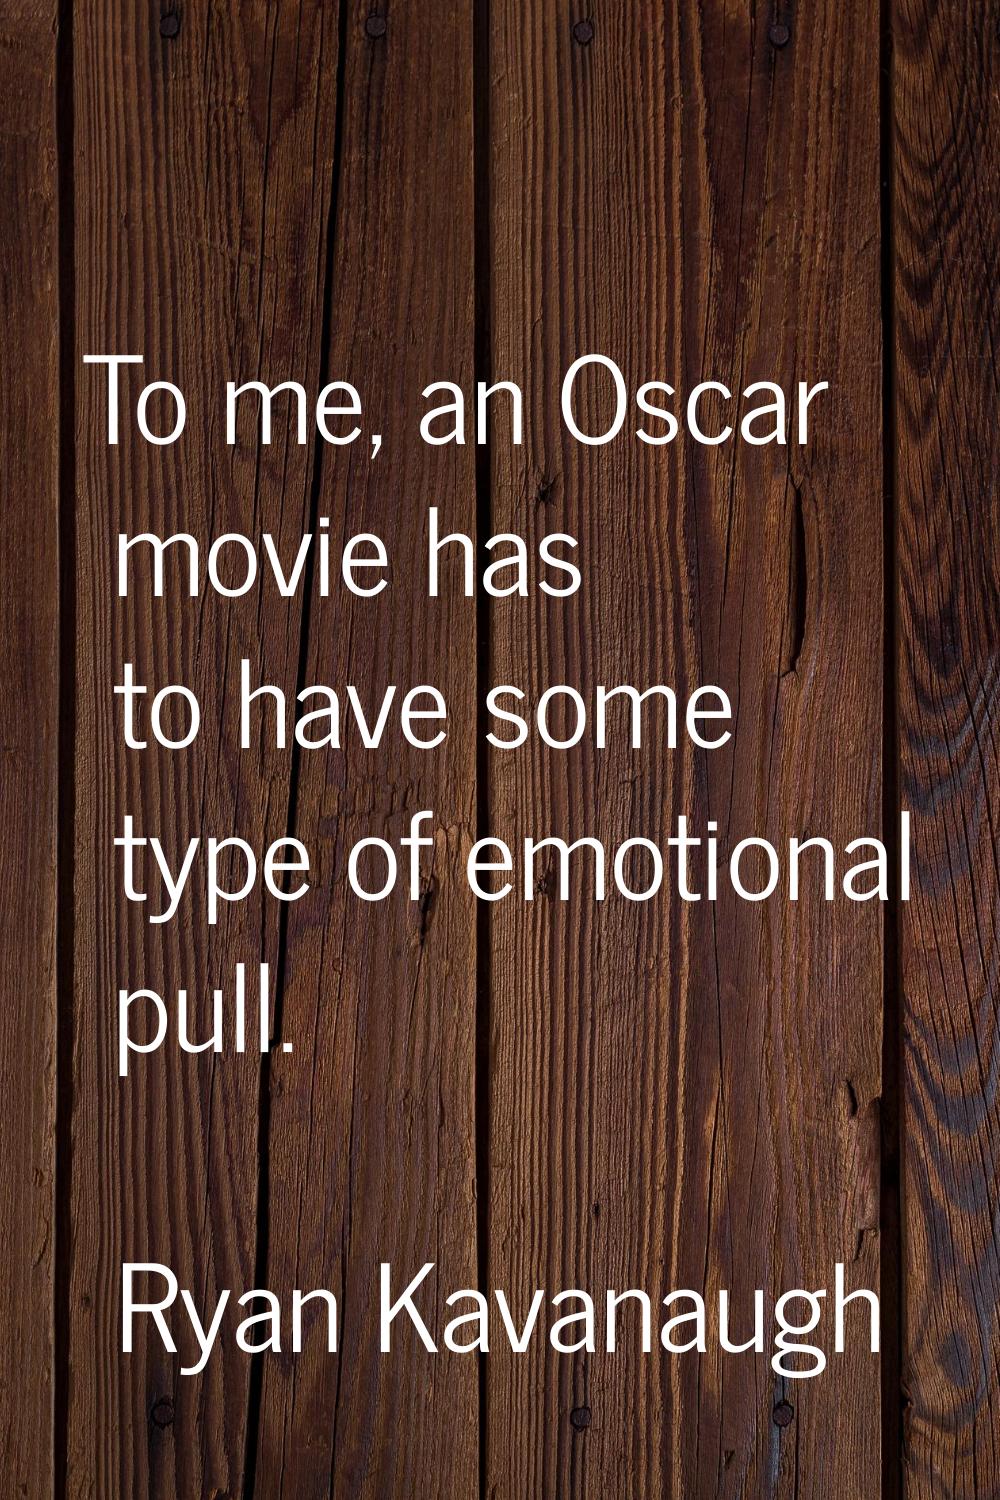 To me, an Oscar movie has to have some type of emotional pull.